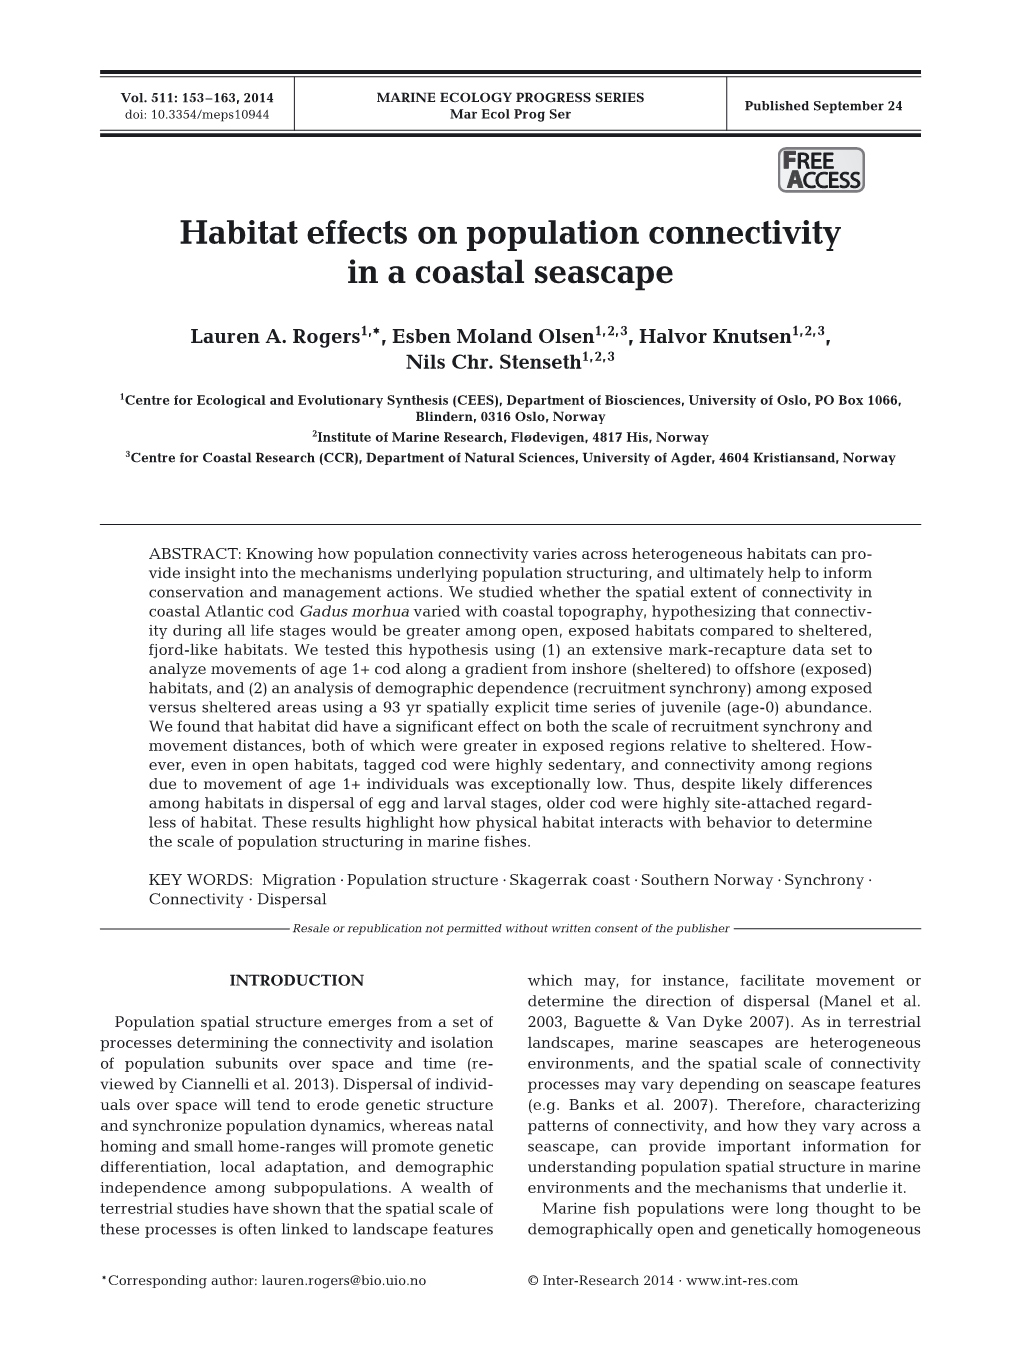 Habitat Effects on Population Connectivity in a Coastal Seascape